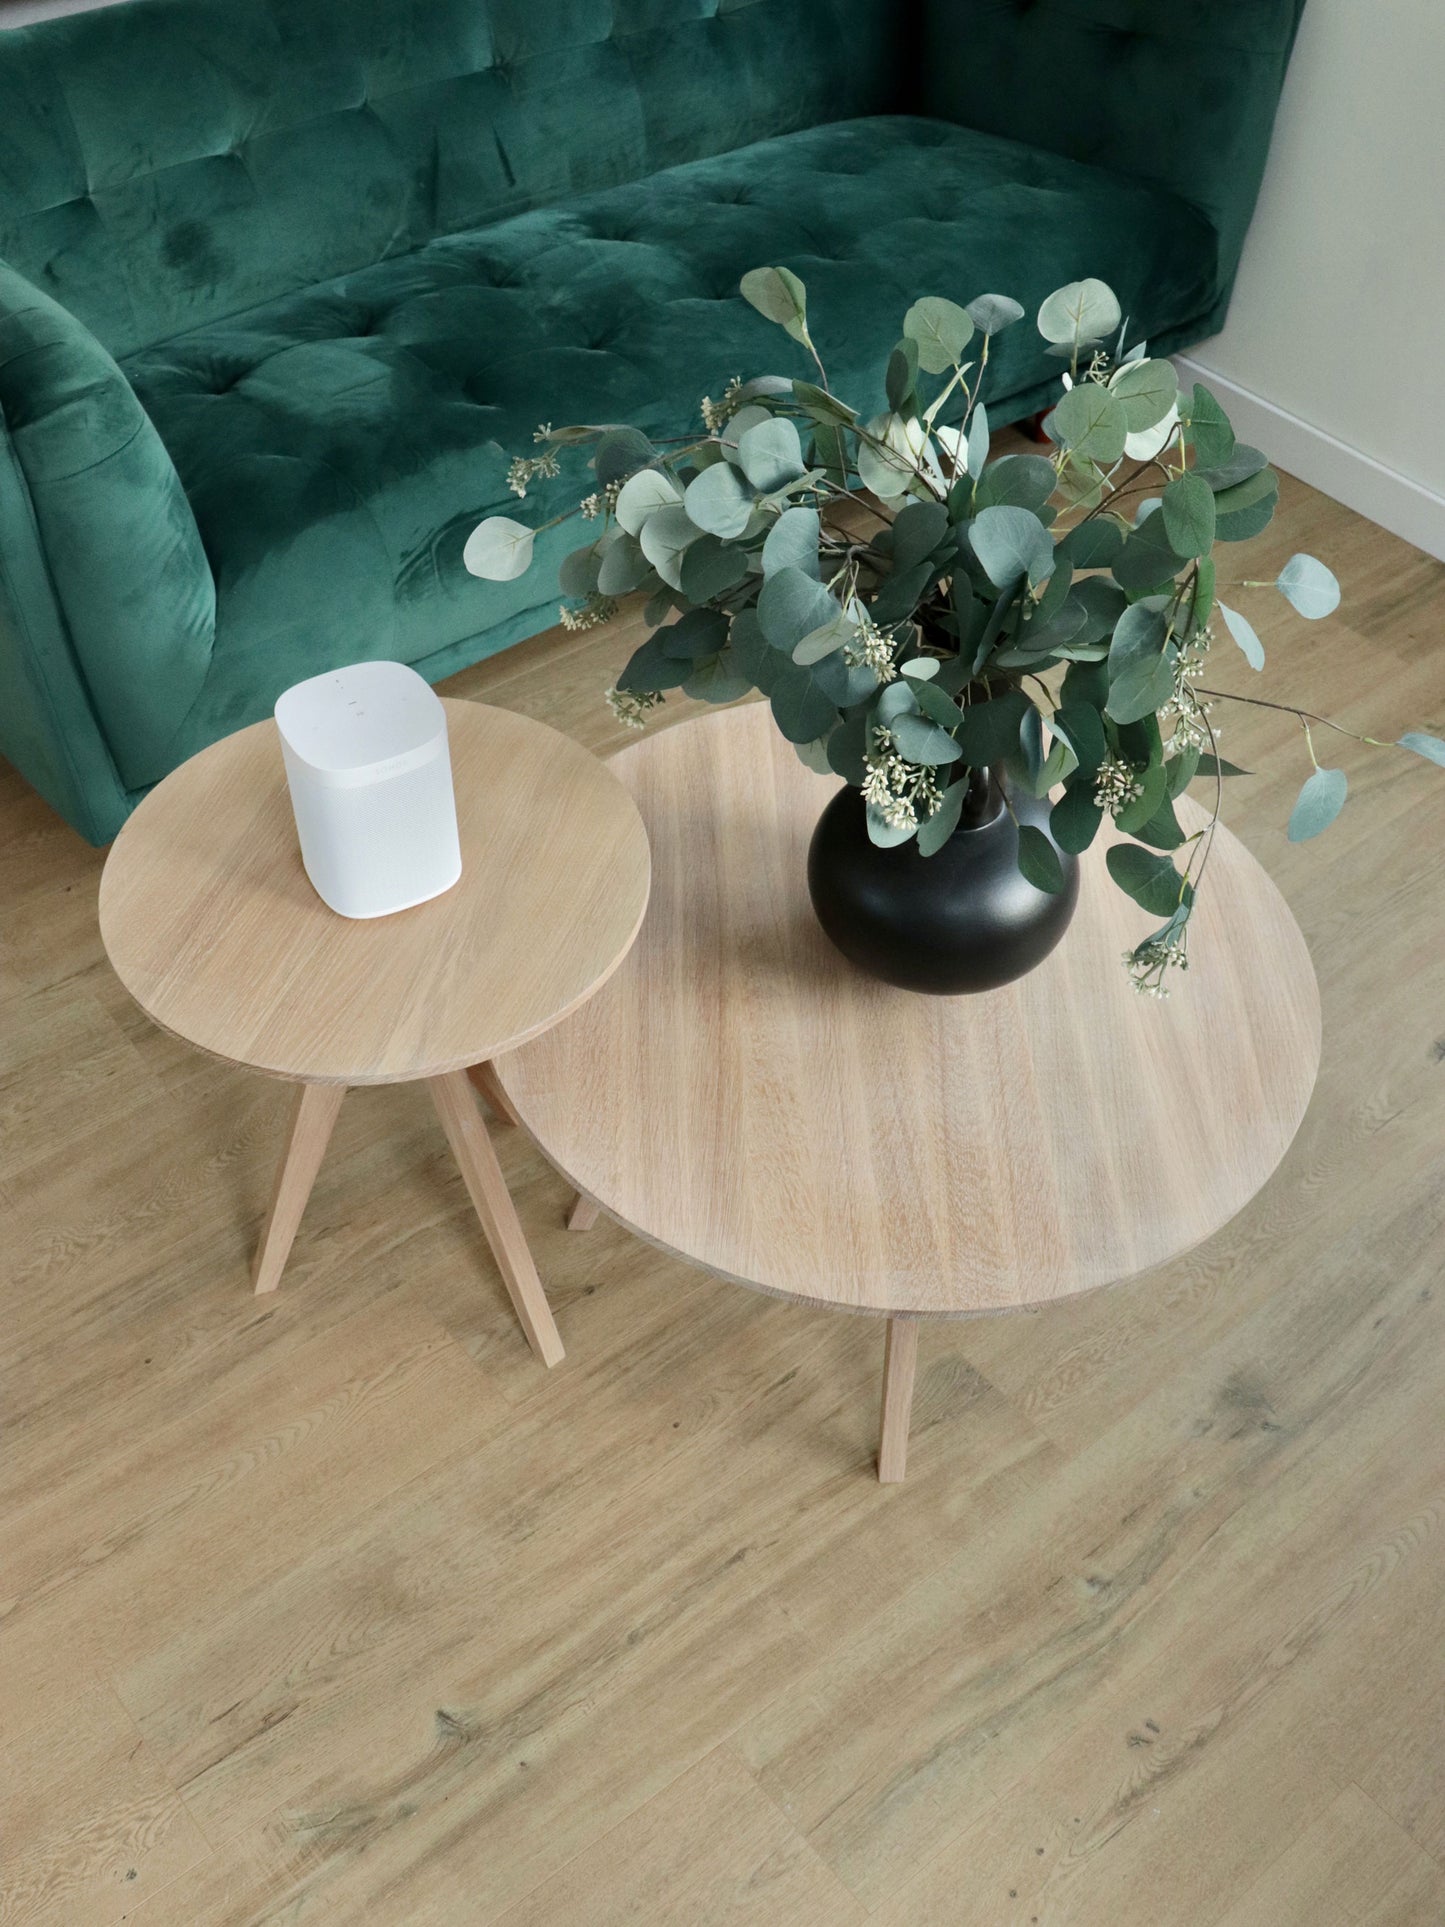 The Line edition End Table | White Oak